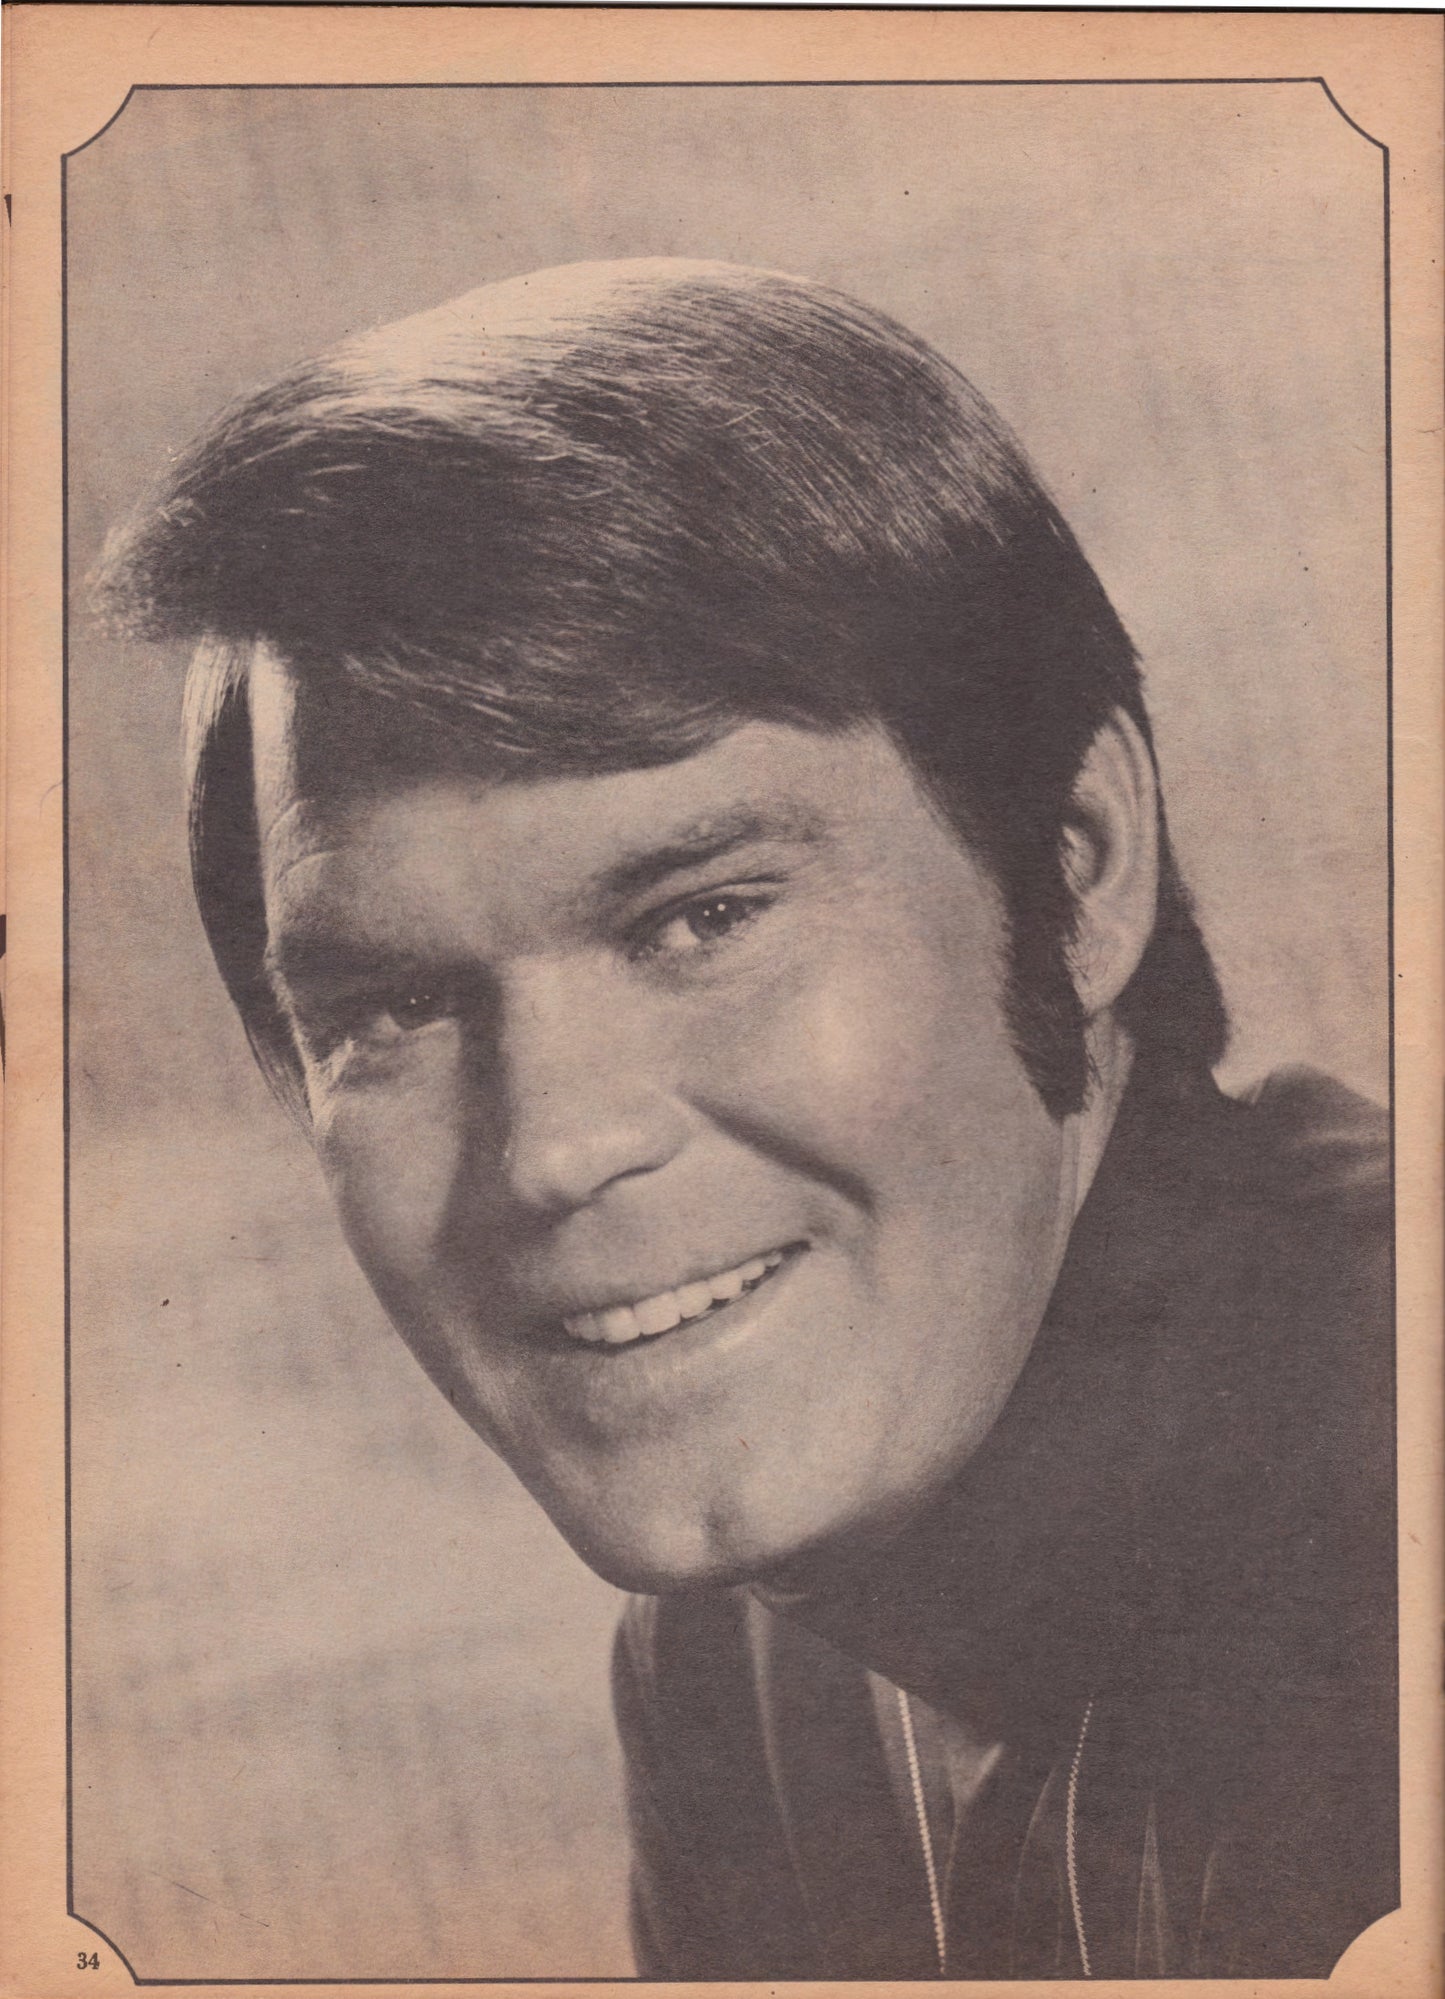 Country Western Stars Glen Campbell And Johnny Cash Magazine January 1970